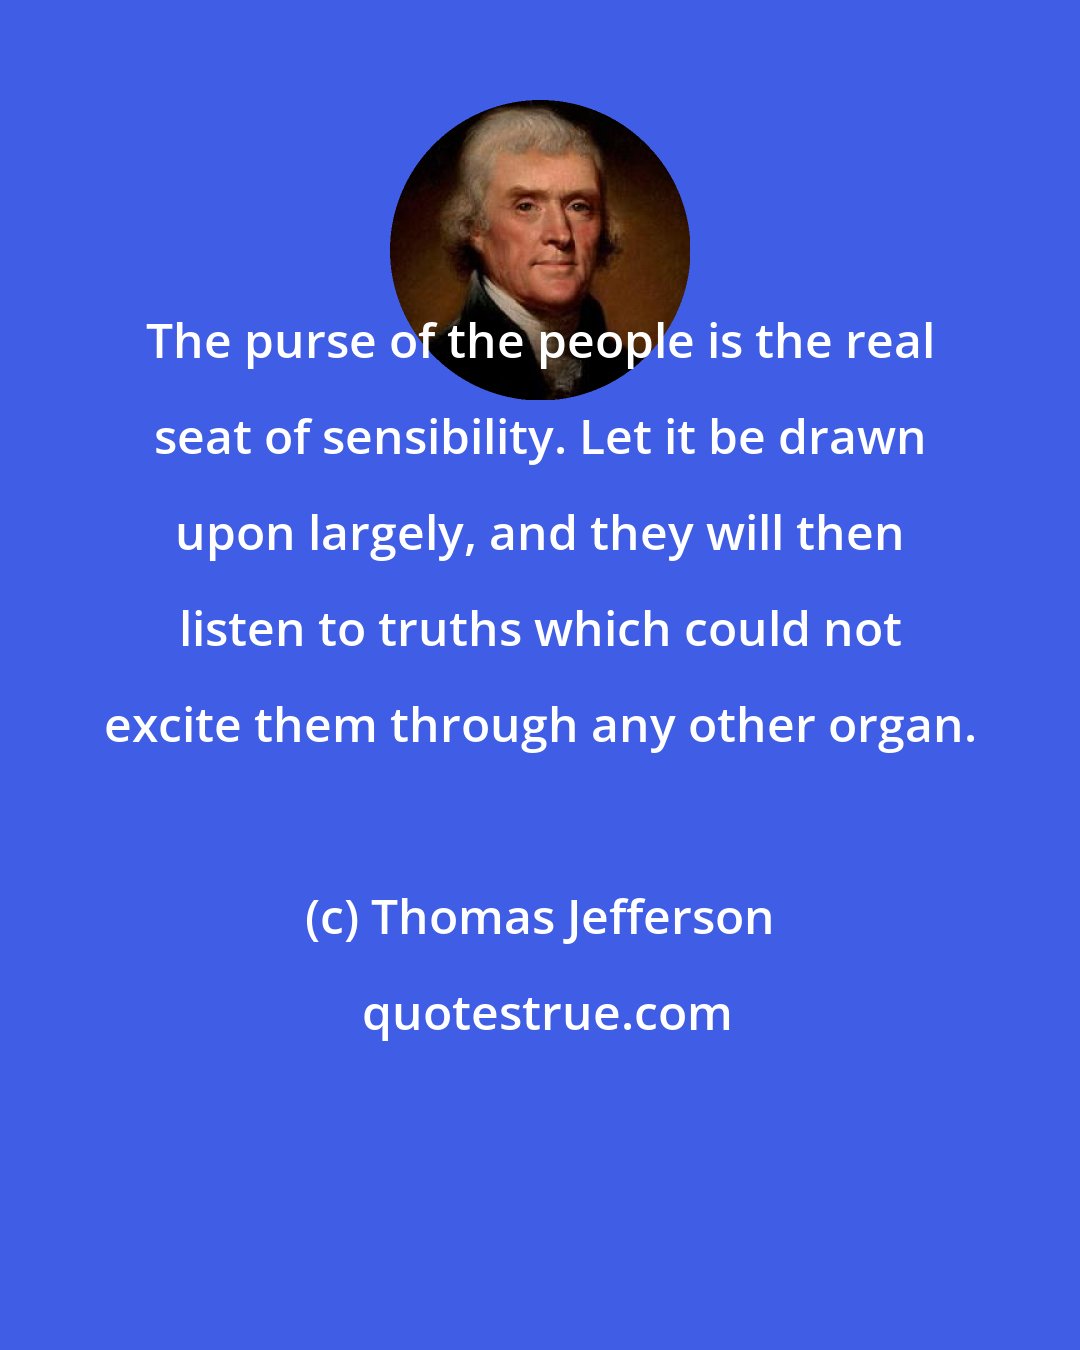 Thomas Jefferson: The purse of the people is the real seat of sensibility. Let it be drawn upon largely, and they will then listen to truths which could not excite them through any other organ.